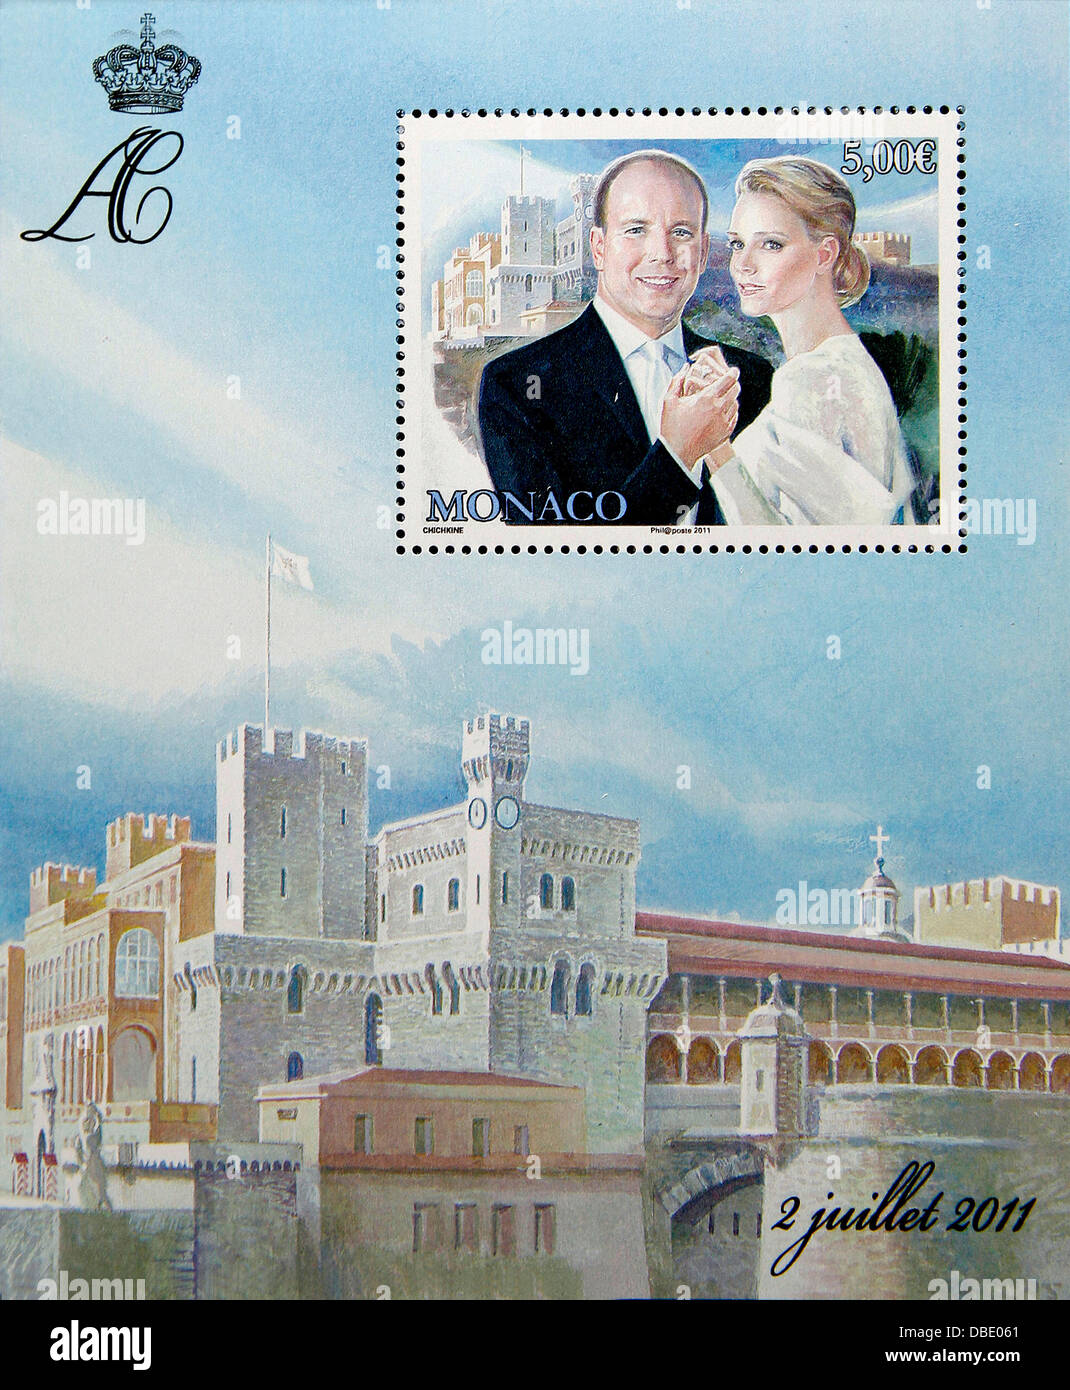 prince-albert-of-monaco-and-charlene-wittstock-appear-on-postage-stamps-DBE061.jpg